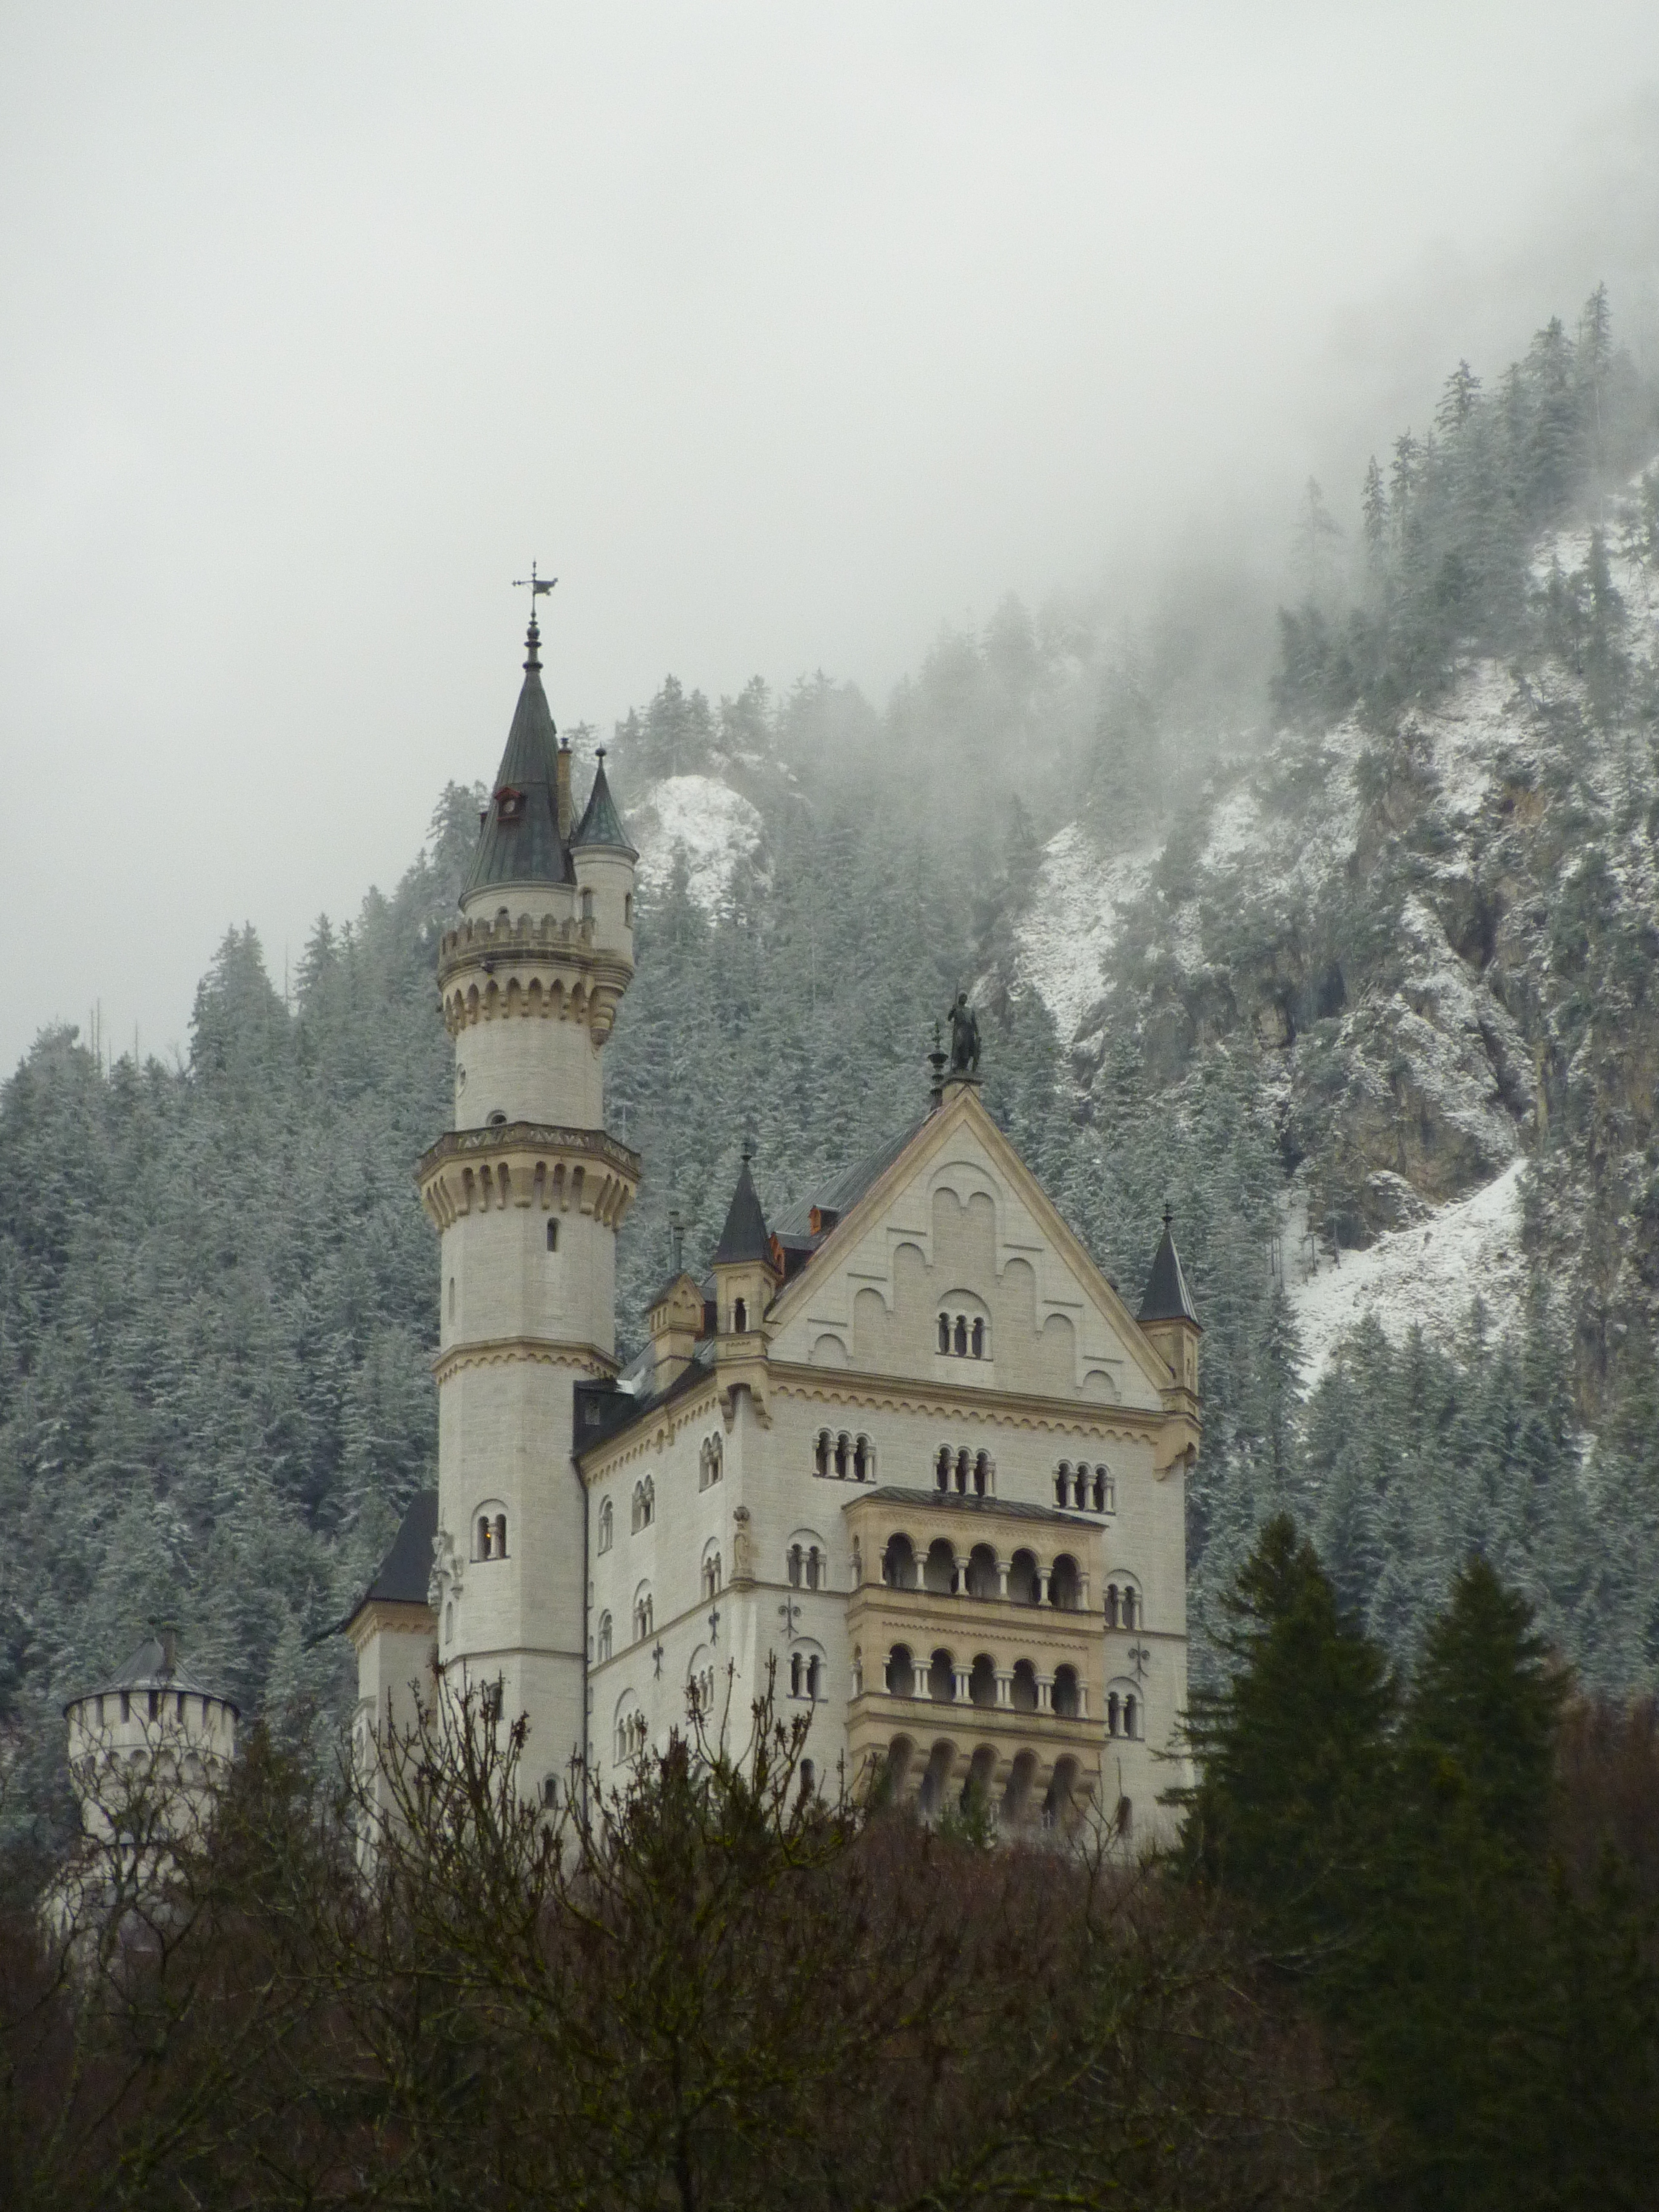 The fairytale castles from childhood dreams